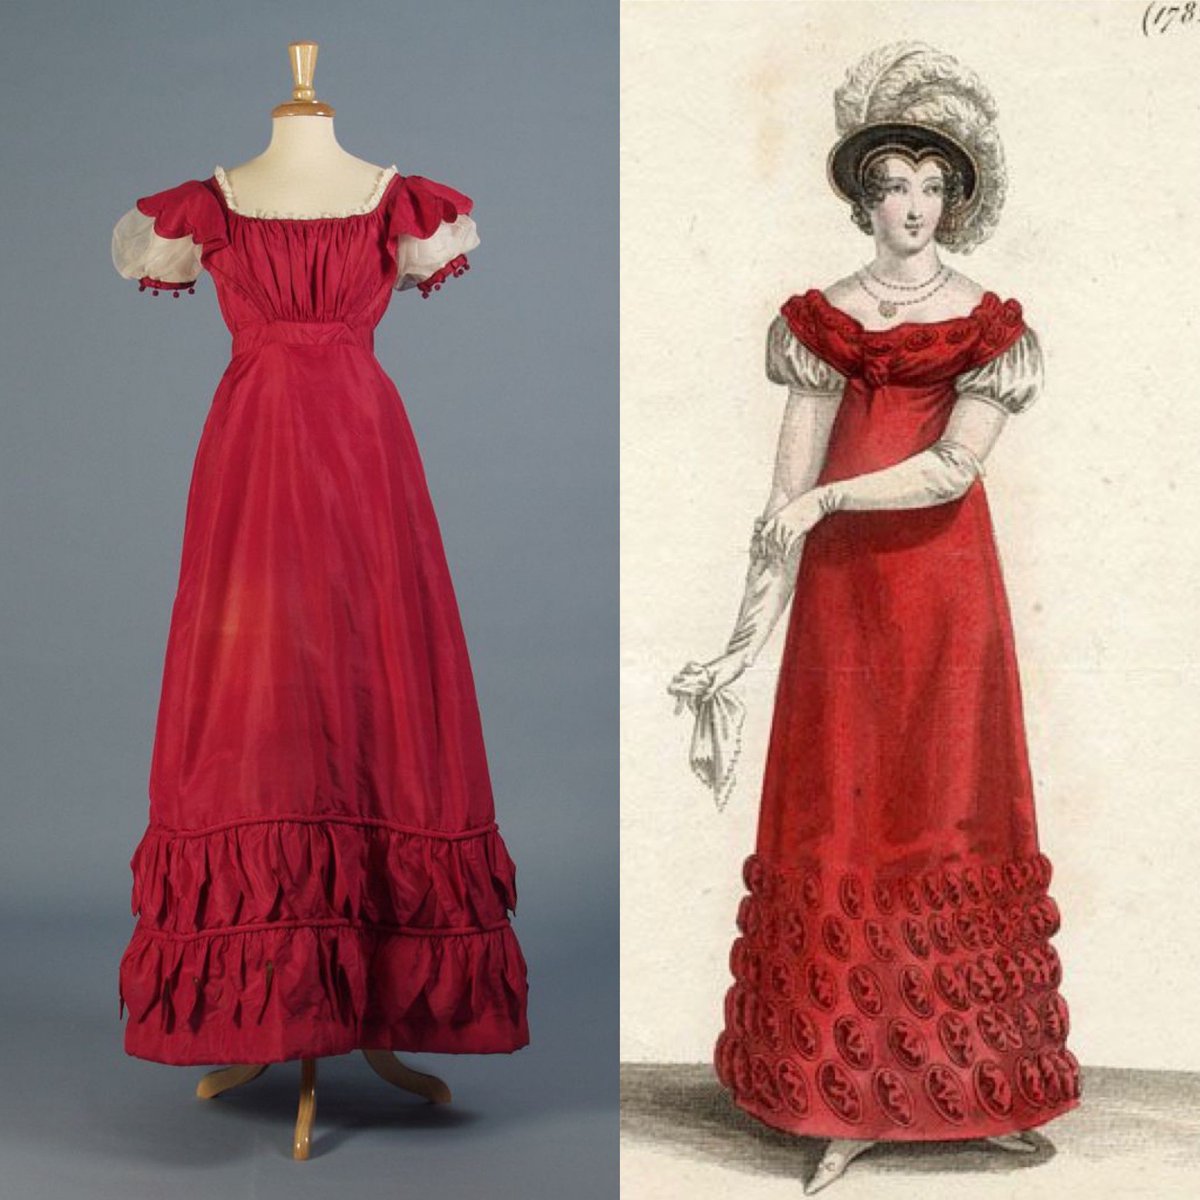 Gauzy white puff sleeves feature both in this surviving #1820s dress and a slightly earlier fashion plate, drawing on Gothic fictions and Tudor aesthetics here. Self decorated hems and gathered bodices are replicated too, from image to object @KSUMuseum #fashionhistory